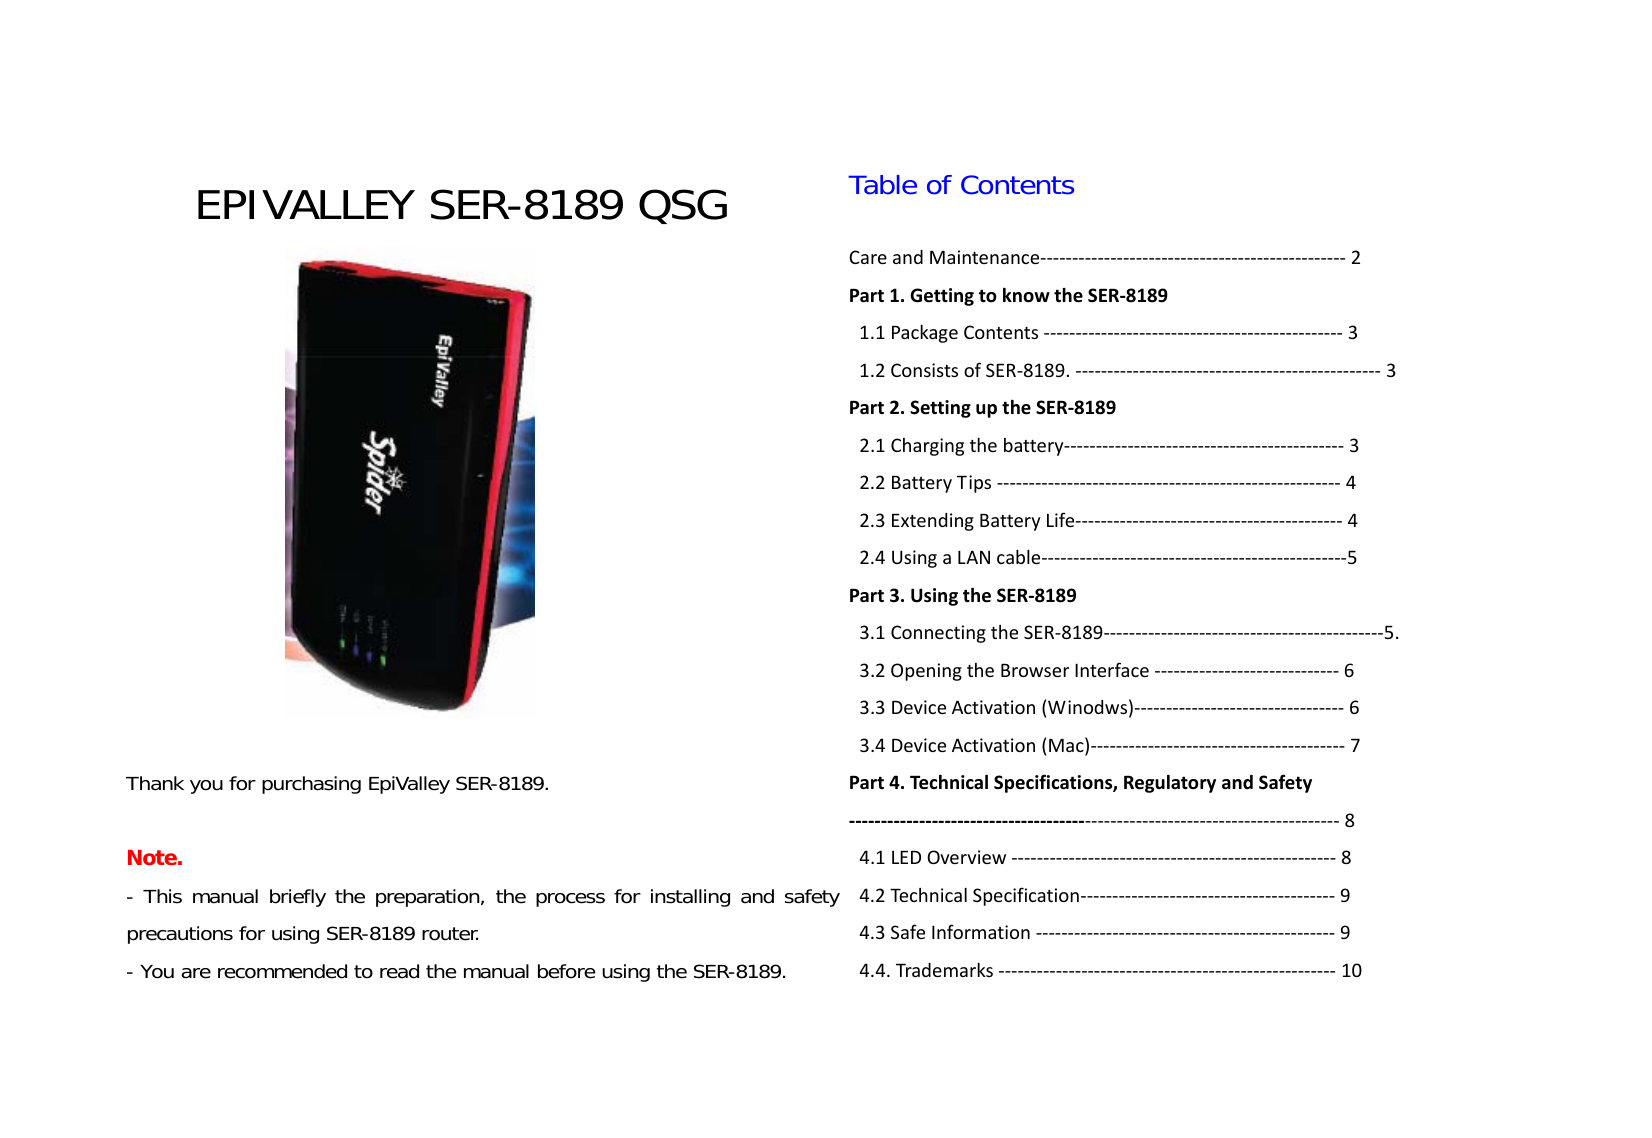  EPIVALLEY SER-8189 QSG   Thank you for purchasing EpiValley SER-8189.   Note.  - This manual briefly the preparation, the process for installing and safety precautions for using SER-8189 router.  - You are recommended to read the manual before using the SER-8189.   Table of Contents  CareandMaintenance‐‐‐‐‐‐‐‐‐‐‐‐‐‐‐‐‐‐‐‐‐‐‐‐‐‐‐‐‐‐‐‐‐‐‐‐‐‐‐‐‐‐‐‐‐‐‐‐2Part1.GettingtoknowtheSER‐81891.1PackageContents‐‐‐‐‐‐‐‐‐‐‐‐‐‐‐‐‐‐‐‐‐‐‐‐‐‐‐‐‐‐‐‐‐‐‐‐‐‐‐‐‐‐‐‐‐‐‐31.2ConsistsofSER‐8189.‐‐‐‐‐‐‐‐‐‐‐‐‐‐‐‐‐‐‐‐‐‐‐‐‐‐‐‐‐‐‐‐‐‐‐‐‐‐‐‐‐‐‐‐‐‐‐‐3Part2.SettinguptheSER‐81892.1Chargingthebattery‐‐‐‐‐‐‐‐‐‐‐‐‐‐‐‐‐‐‐‐‐‐‐‐‐‐‐‐‐‐‐‐‐‐‐‐‐‐‐‐‐‐‐‐32.2BatteryTips‐‐‐‐‐‐‐‐‐‐‐‐‐‐‐‐‐‐‐‐‐‐‐‐‐‐‐‐‐‐‐‐‐‐‐‐‐‐‐‐‐‐‐‐‐‐‐‐‐‐‐‐‐‐42.3ExtendingBatteryLife‐‐‐‐‐‐‐‐‐‐‐‐‐‐‐‐‐‐‐‐‐‐‐‐‐‐‐‐‐‐‐‐‐‐‐‐‐‐‐‐‐‐42.4UsingaLANcable‐‐‐‐‐‐‐‐‐‐‐‐‐‐‐‐‐‐‐‐‐‐‐‐‐‐‐‐‐‐‐‐‐‐‐‐‐‐‐‐‐‐‐‐‐‐‐‐5Part3.UsingtheSER‐81893.1ConnectingtheSER‐8189‐‐‐‐‐‐‐‐‐‐‐‐‐‐‐‐‐‐‐‐‐‐‐‐‐‐‐‐‐‐‐‐‐‐‐‐‐‐‐‐‐‐‐‐5.3.2OpeningtheBrowserInterface‐‐‐‐‐‐‐‐‐‐‐‐‐‐‐‐‐‐‐‐‐‐‐‐‐‐‐‐‐63.3DeviceActivation(Winodws)‐‐‐‐‐‐‐‐‐‐‐‐‐‐‐‐‐‐‐‐‐‐‐‐‐‐‐‐‐‐‐‐‐63.4DeviceActivation(Mac)‐‐‐‐‐‐‐‐‐‐‐‐‐‐‐‐‐‐‐‐‐‐‐‐‐‐‐‐‐‐‐‐‐‐‐‐‐‐‐‐7Part4.TechnicalSpecifications,RegulatoryandSafety‐‐‐‐‐‐‐‐‐‐‐‐‐‐‐‐‐‐‐‐‐‐‐‐‐‐‐‐‐‐‐‐‐‐‐‐‐‐‐‐‐‐‐‐‐‐‐‐‐‐‐‐‐‐‐‐‐‐‐‐‐‐‐‐‐‐‐‐‐‐‐‐‐‐‐‐‐84.1LEDOverview‐‐‐‐‐‐‐‐‐‐‐‐‐‐‐‐‐‐‐‐‐‐‐‐‐‐‐‐‐‐‐‐‐‐‐‐‐‐‐‐‐‐‐‐‐‐‐‐‐‐‐84.2TechnicalSpecification‐‐‐‐‐‐‐‐‐‐‐‐‐‐‐‐‐‐‐‐‐‐‐‐‐‐‐‐‐‐‐‐‐‐‐‐‐‐‐‐94.3SafeInformation‐‐‐‐‐‐‐‐‐‐‐‐‐‐‐‐‐‐‐‐‐‐‐‐‐‐‐‐‐‐‐‐‐‐‐‐‐‐‐‐‐‐‐‐‐‐‐94.4.Trademarks‐‐‐‐‐‐‐‐‐‐‐‐‐‐‐‐‐‐‐‐‐‐‐‐‐‐‐‐‐‐‐‐‐‐‐‐‐‐‐‐‐‐‐‐‐‐‐‐‐‐‐‐‐10